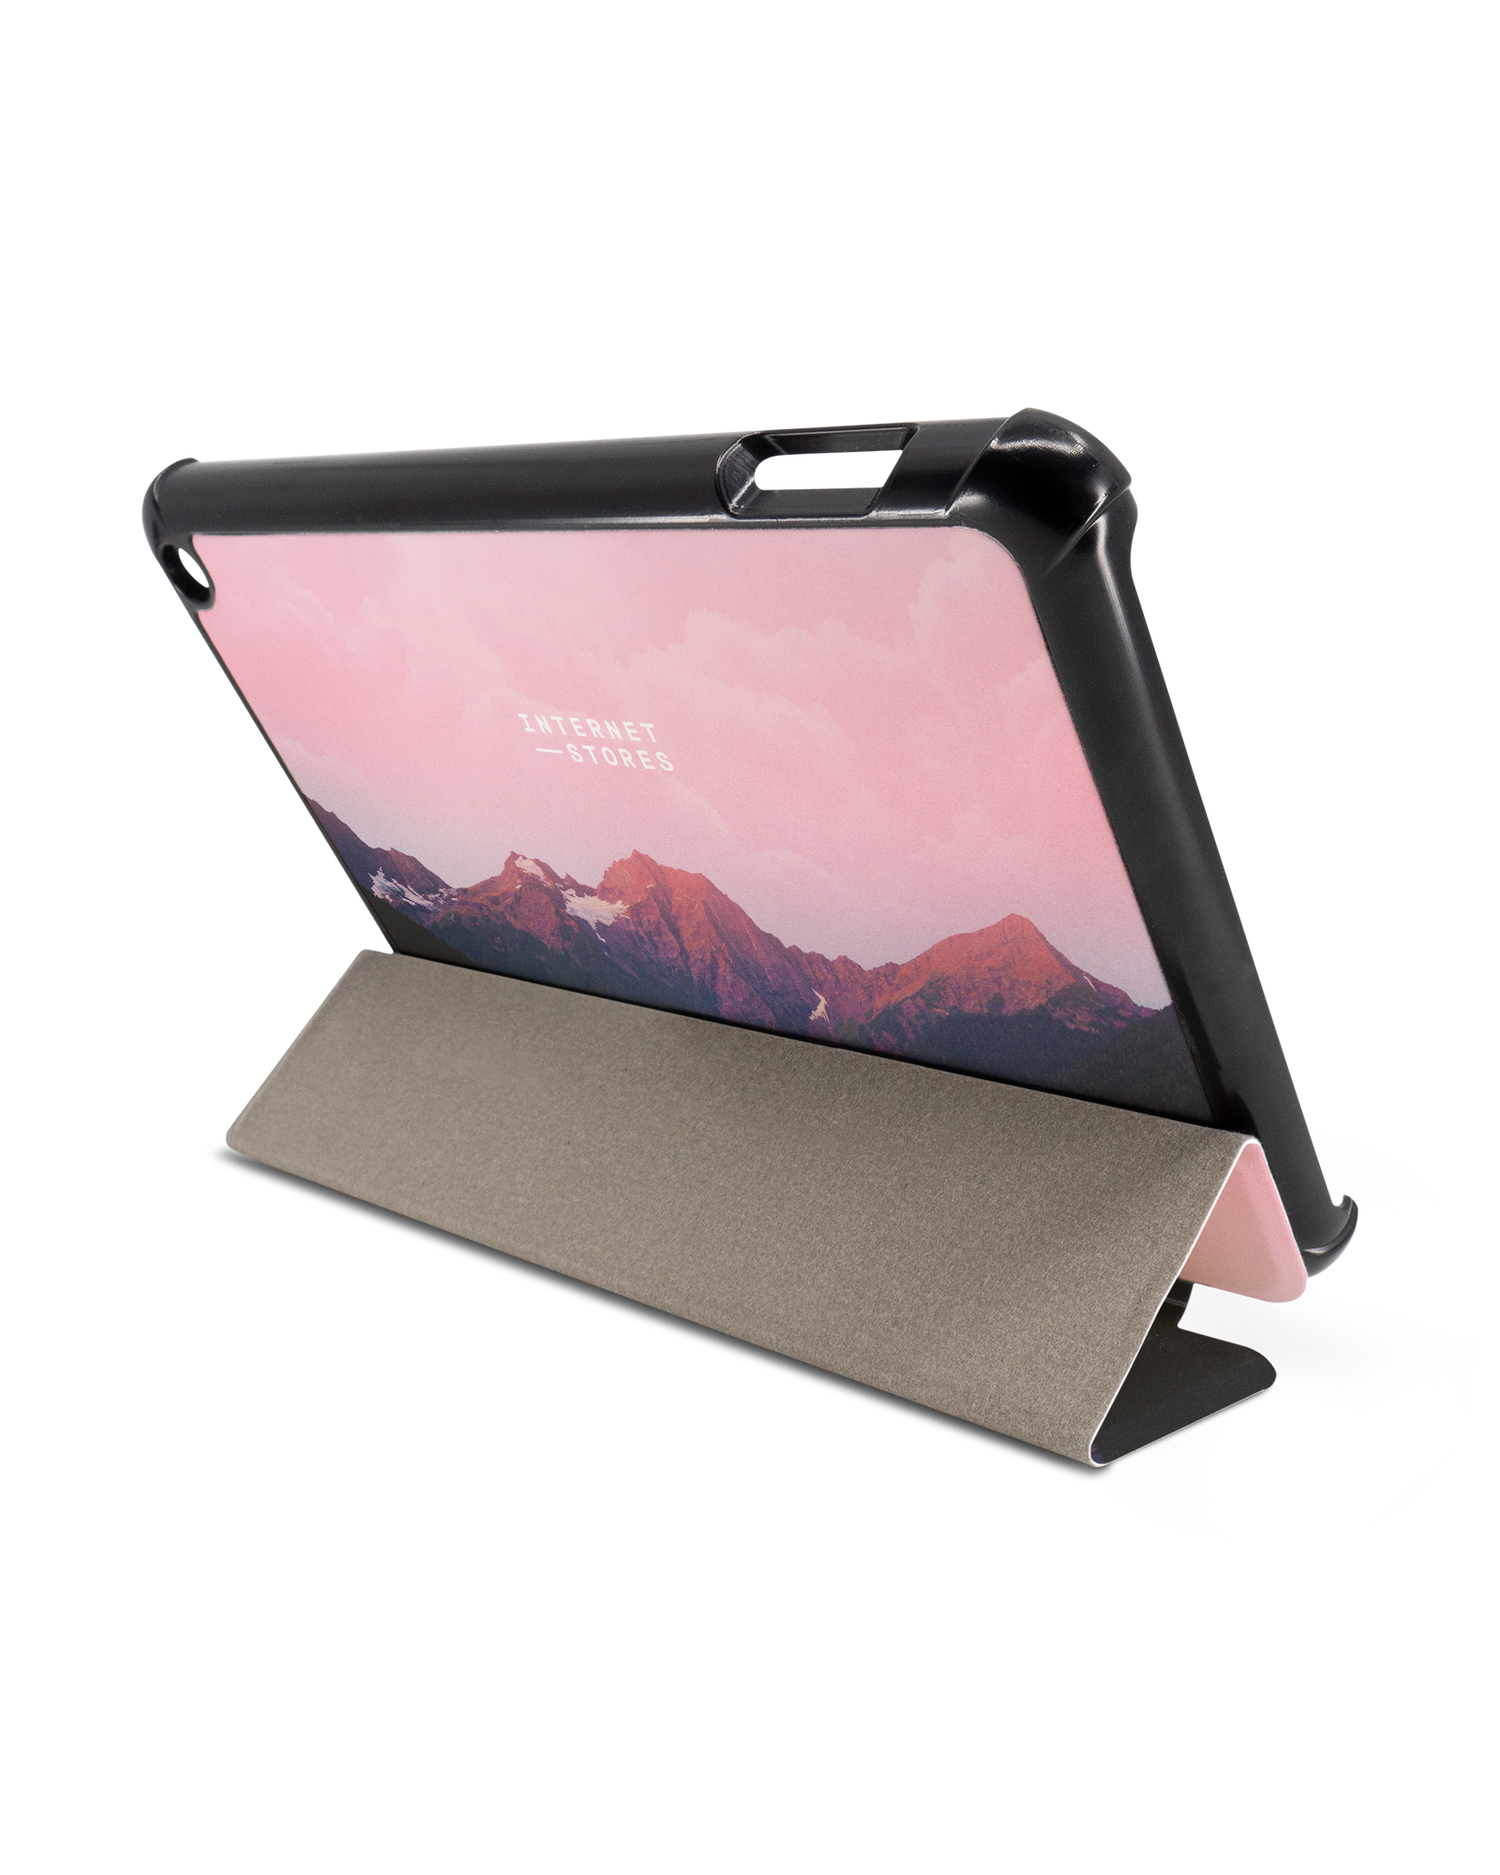 Lake Tablet Smart Case for Amazon Fire 7 (2022): Used as Stand